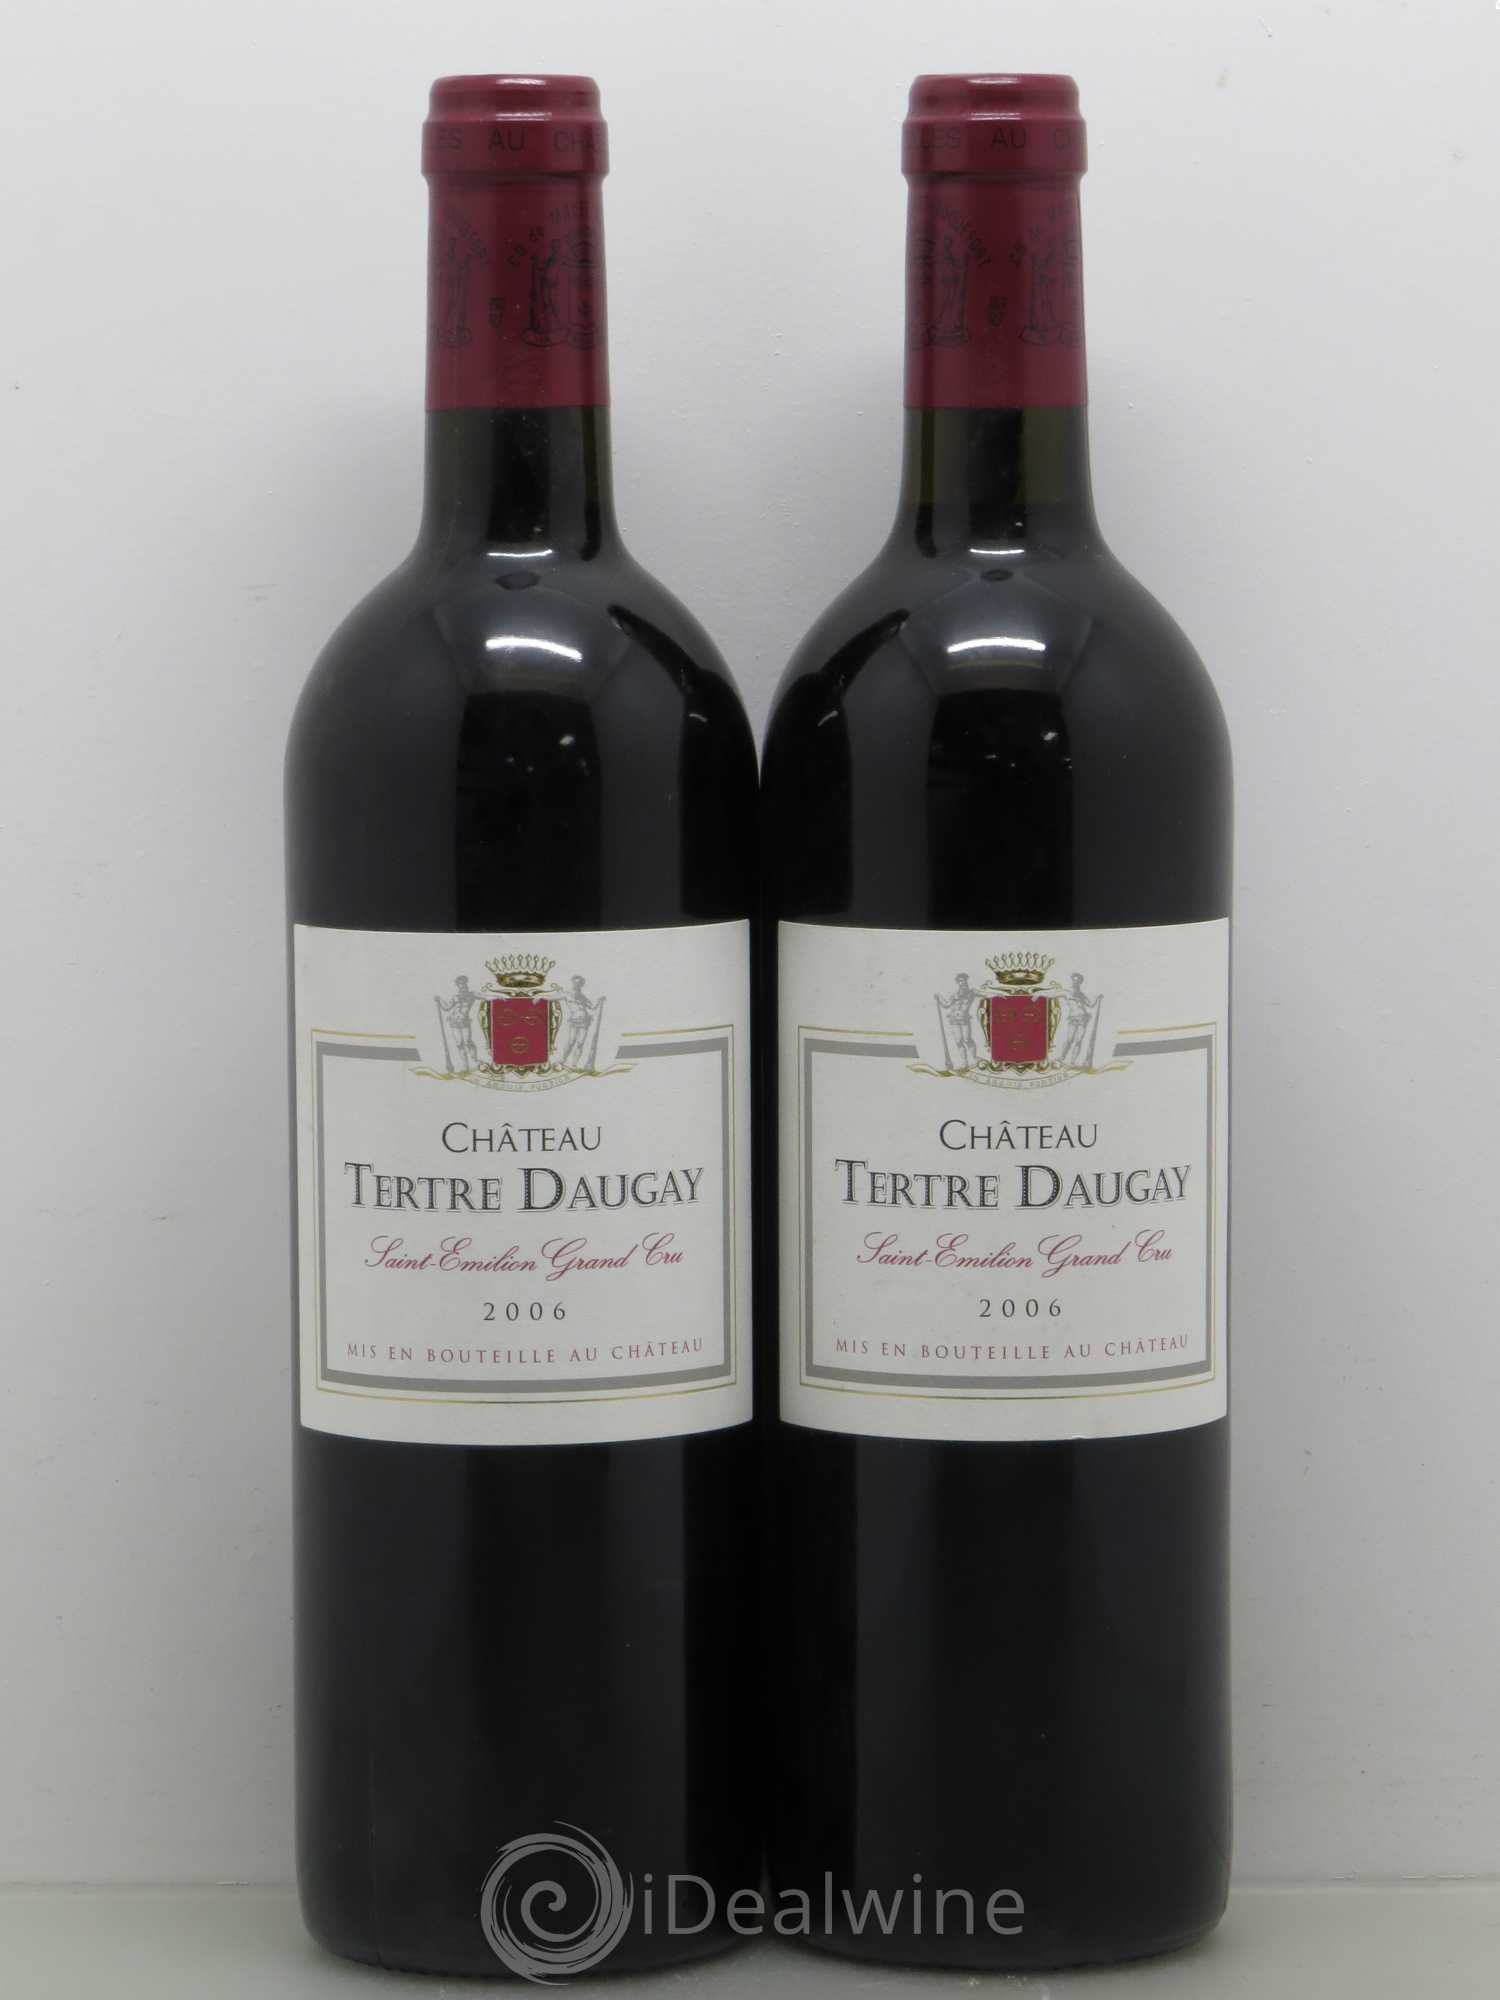 Chateau tertre daugay 2018